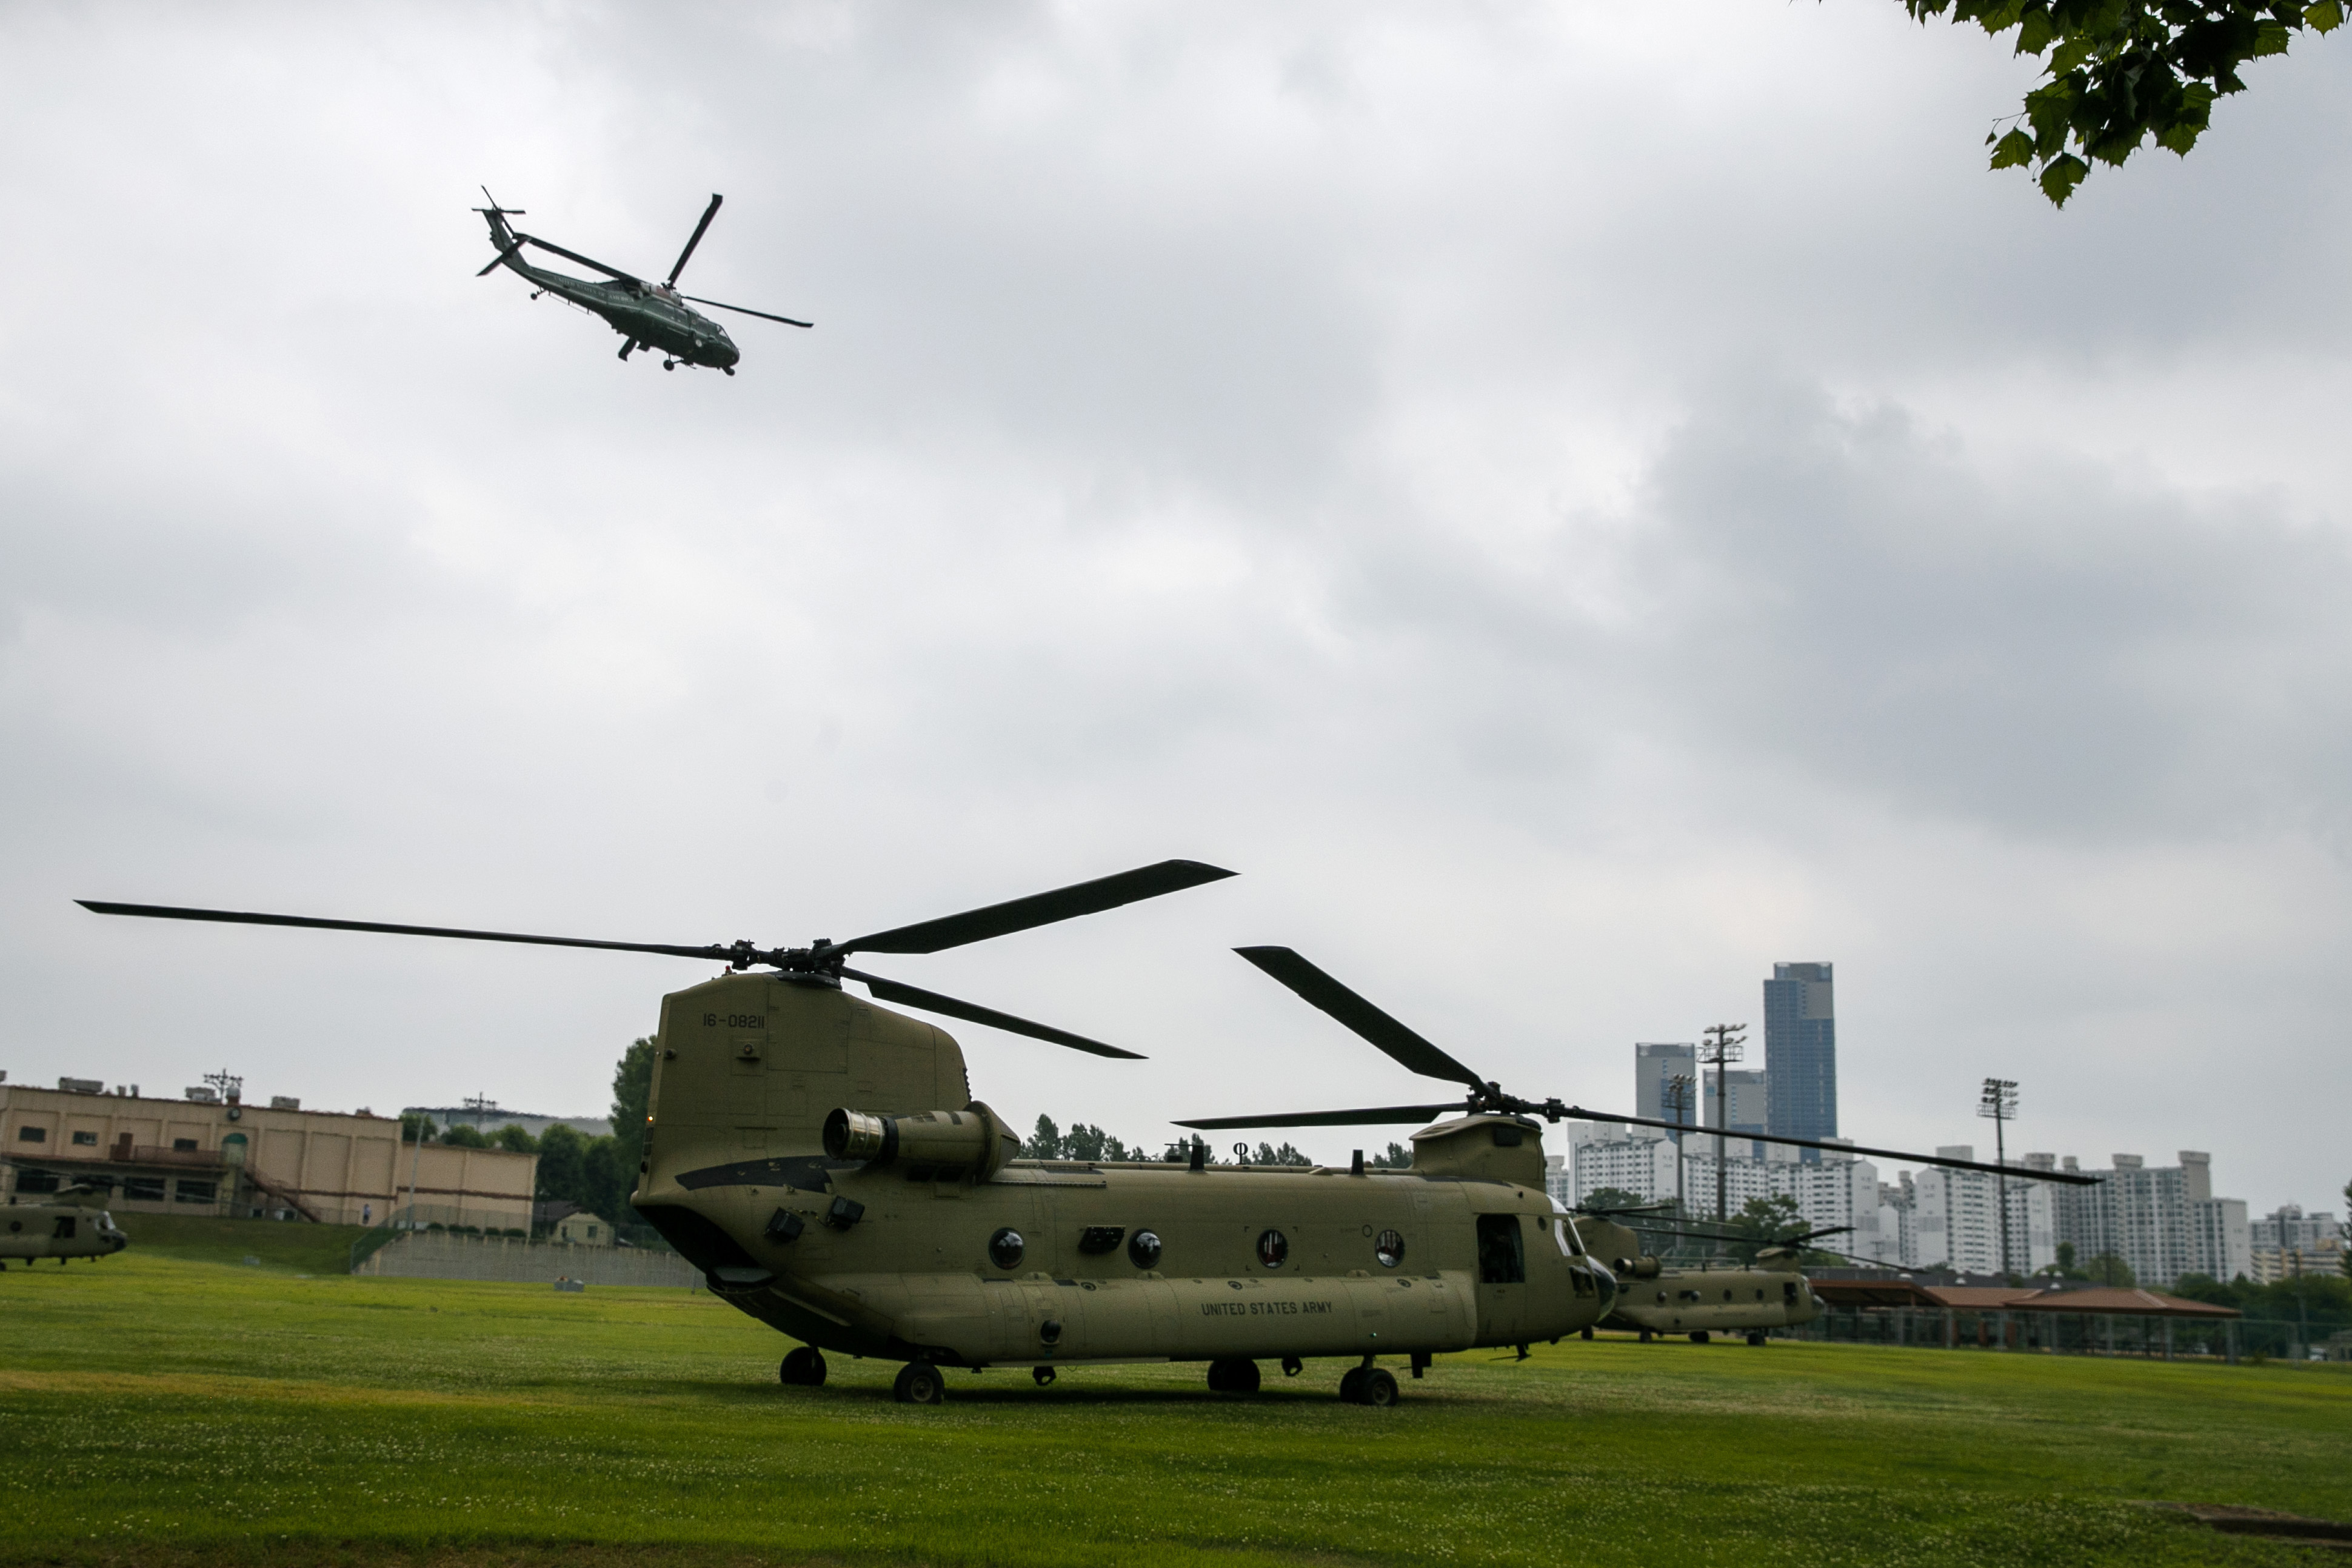 The Marine One helicopter, top, carrying President Donald Trump to the demilitarized zone (DMZ) takes off from Seoul, South Korea, Sunday, June 30, 2019, as a staff helicopter prepares en route to the DMZ. (AP Photo/Jacquelyn Martin, Pool)